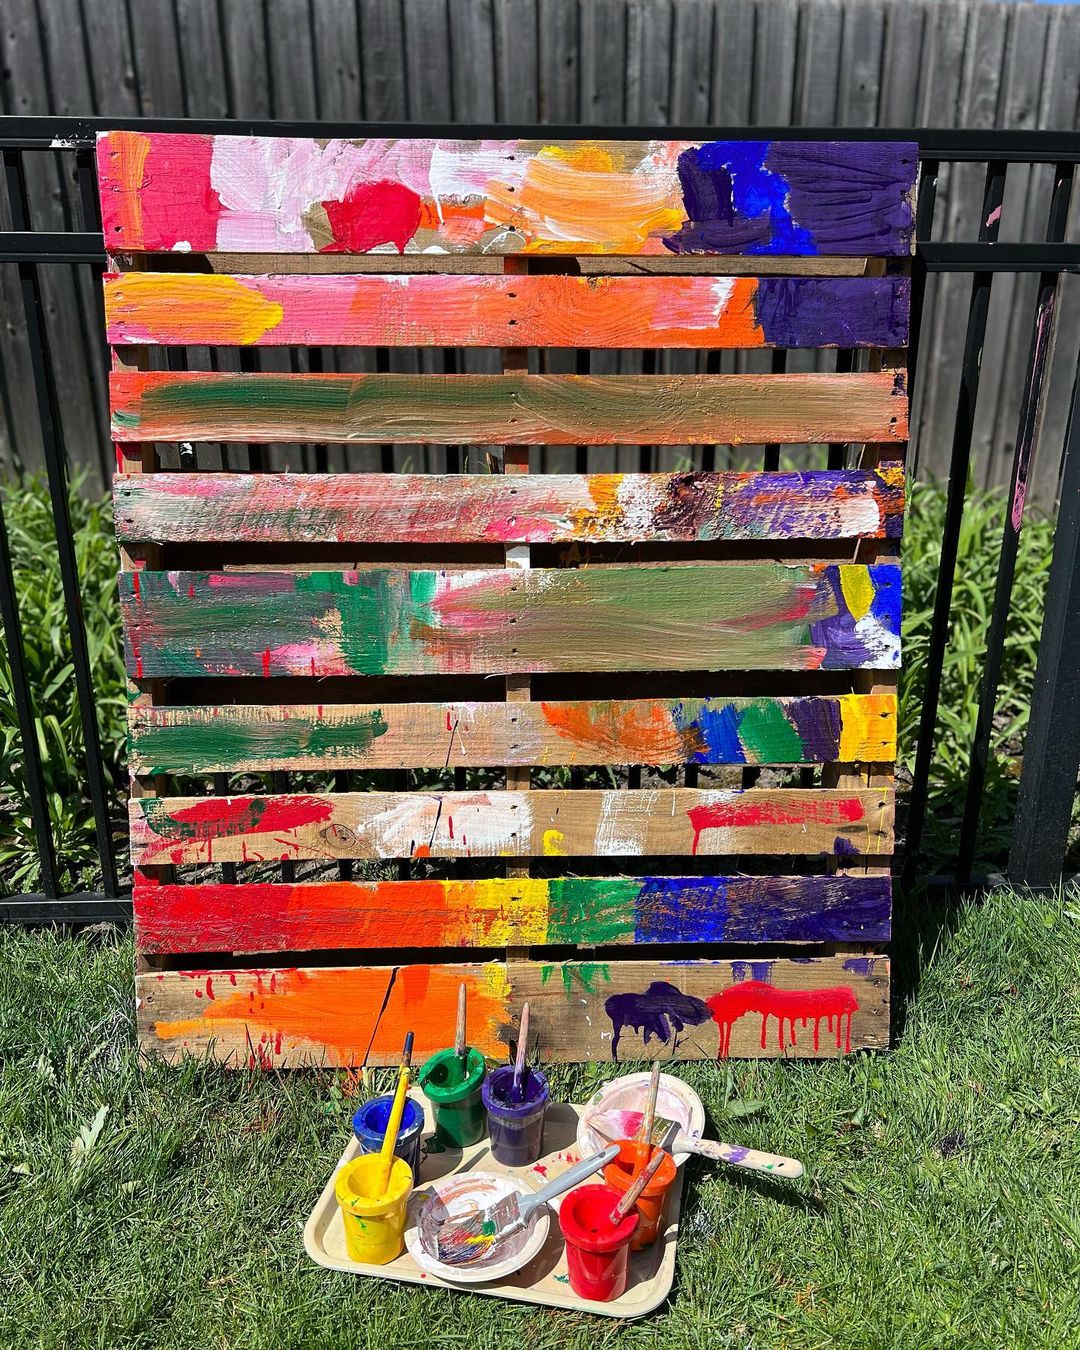 4. @preschoolforyou rainbow coloured action painting on an upright pallet